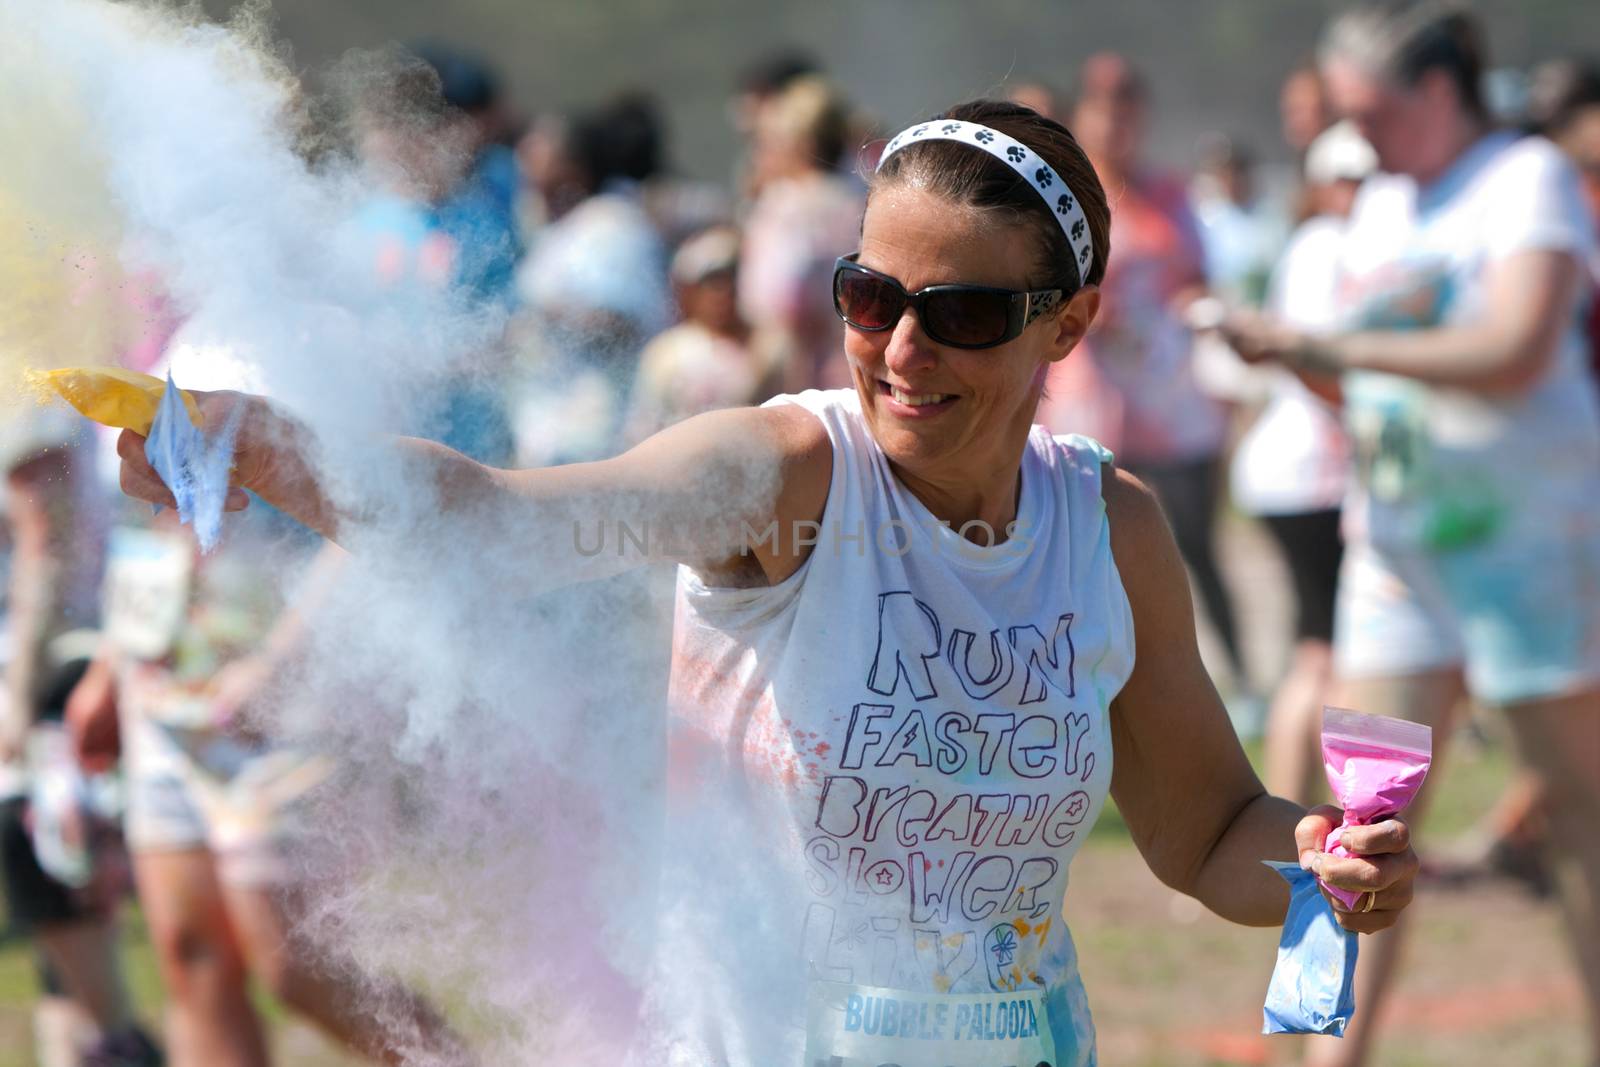 Lawrenceville, GA, USA - May 31, 2014:  A woman throws packets of colored corn starch on others at Bubble Palooza.